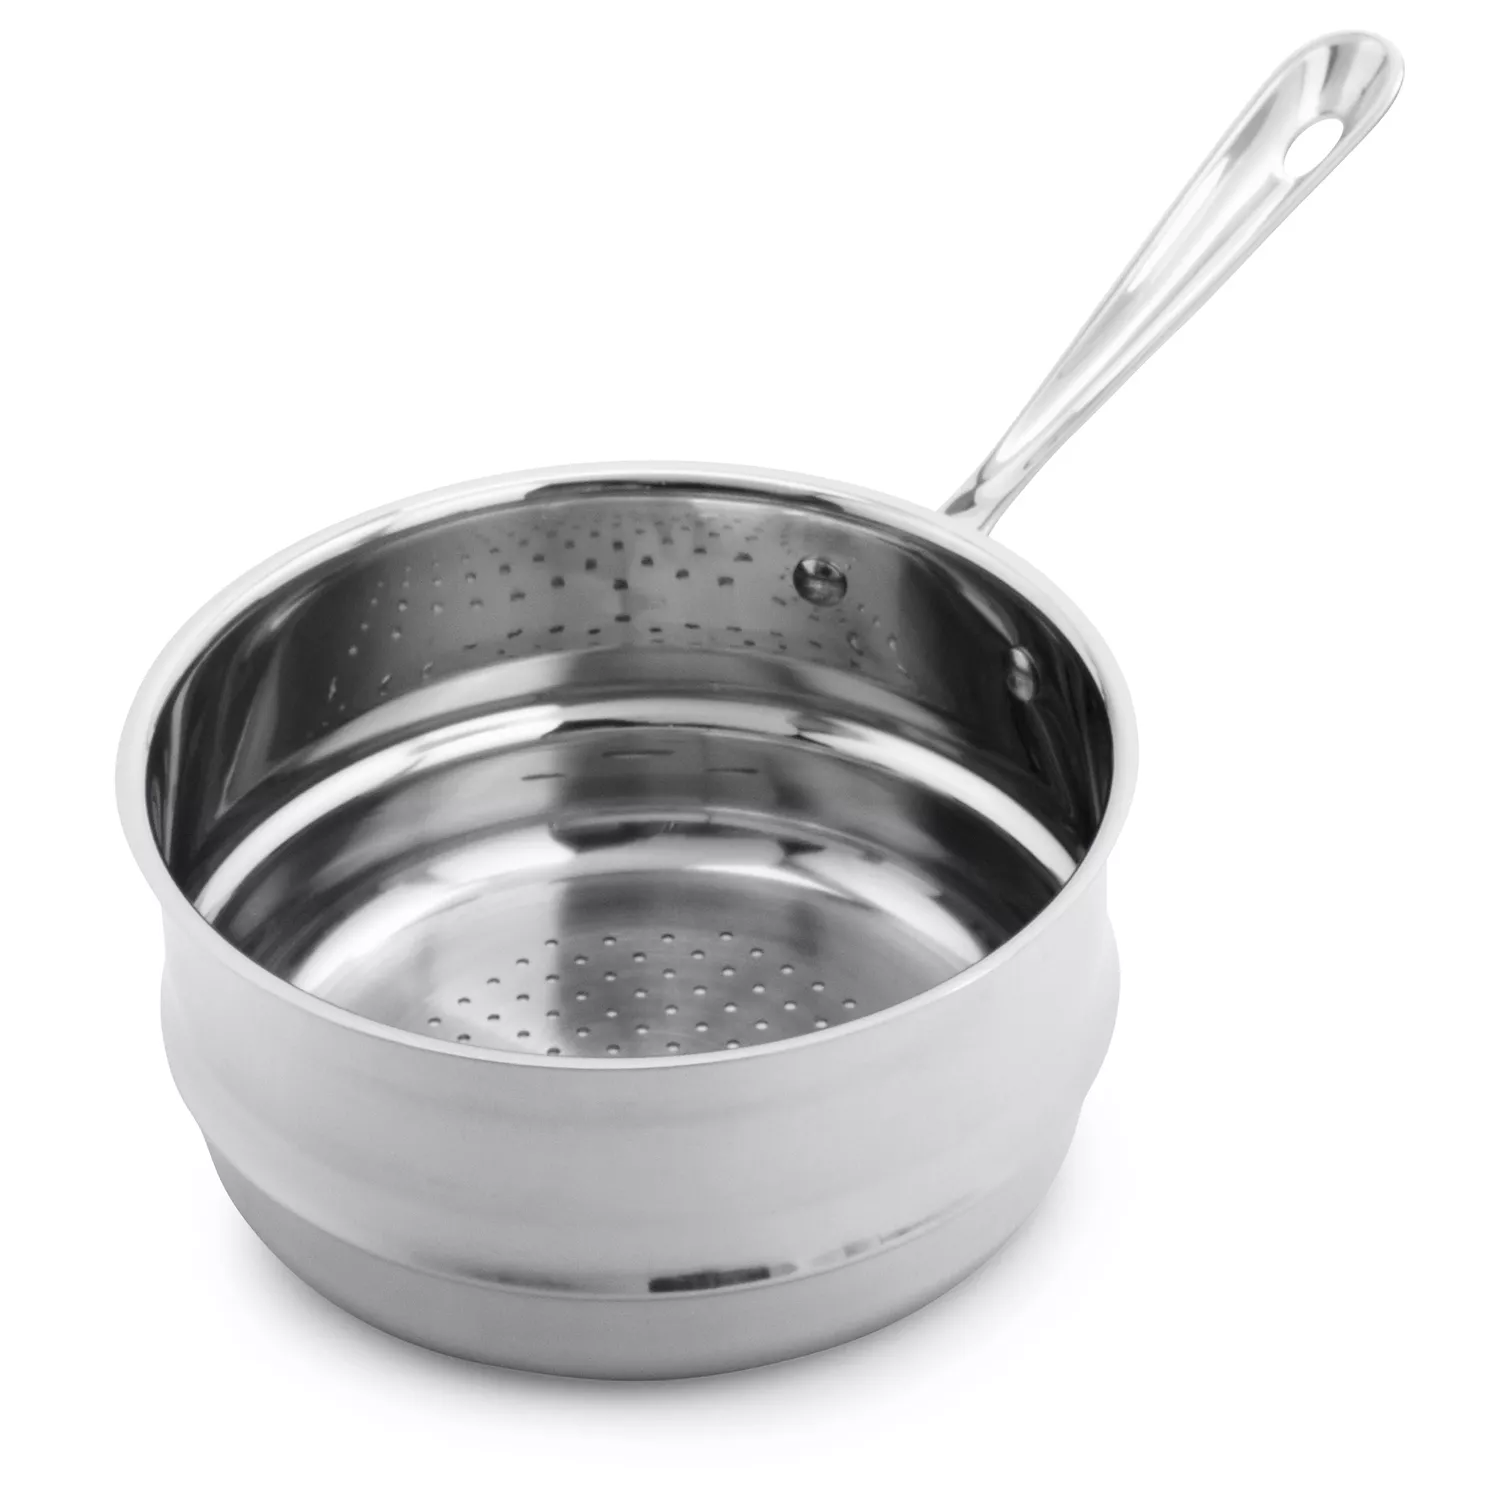 All-Clad 3 quart steamer insert w/LID for 3 and 4 quart All-Clad saucepan  only